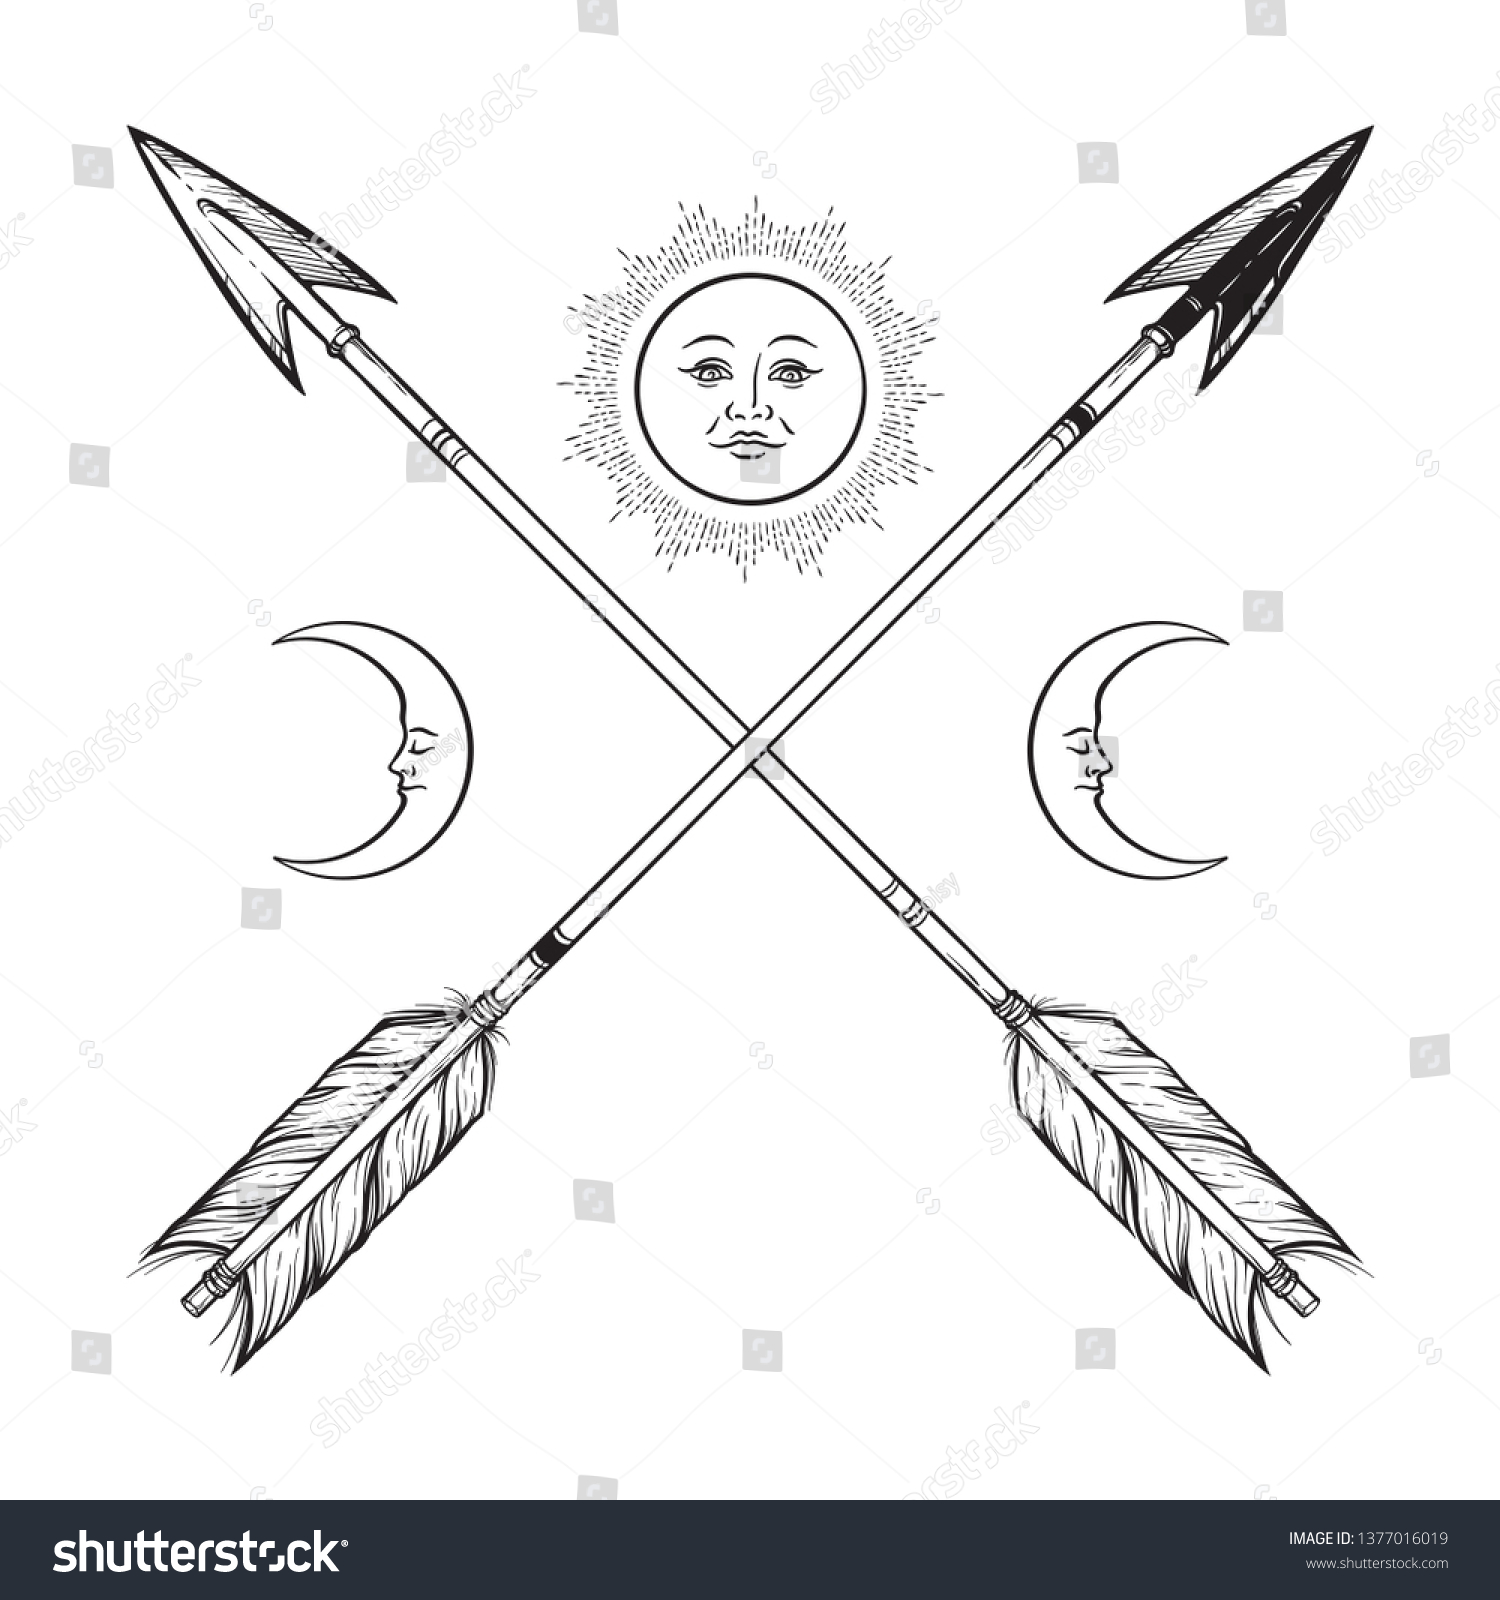 Crossed Arrows Crescents Full Moon Line Stock Vector (Royalty Free ...